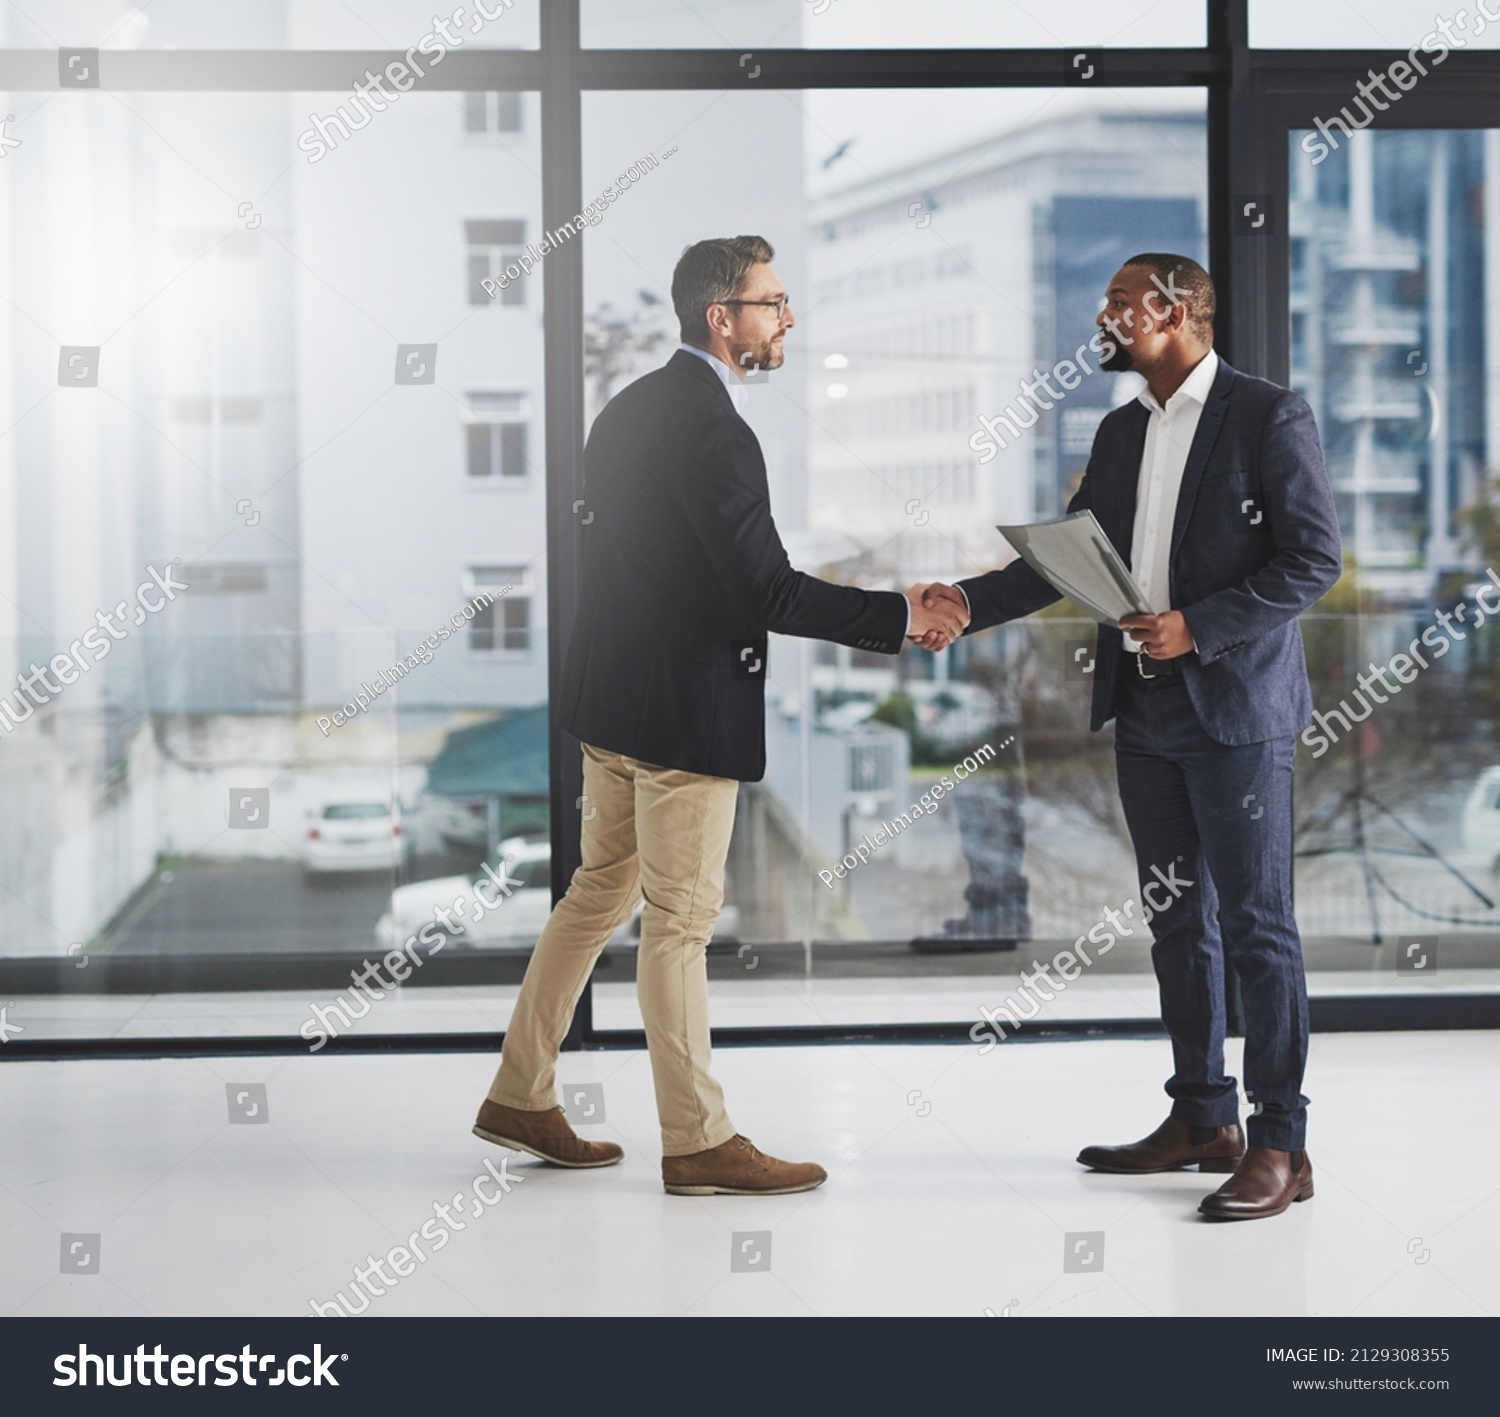 Combining corporate talent. Shot of two businessmen shaking hands at work. #2129308355